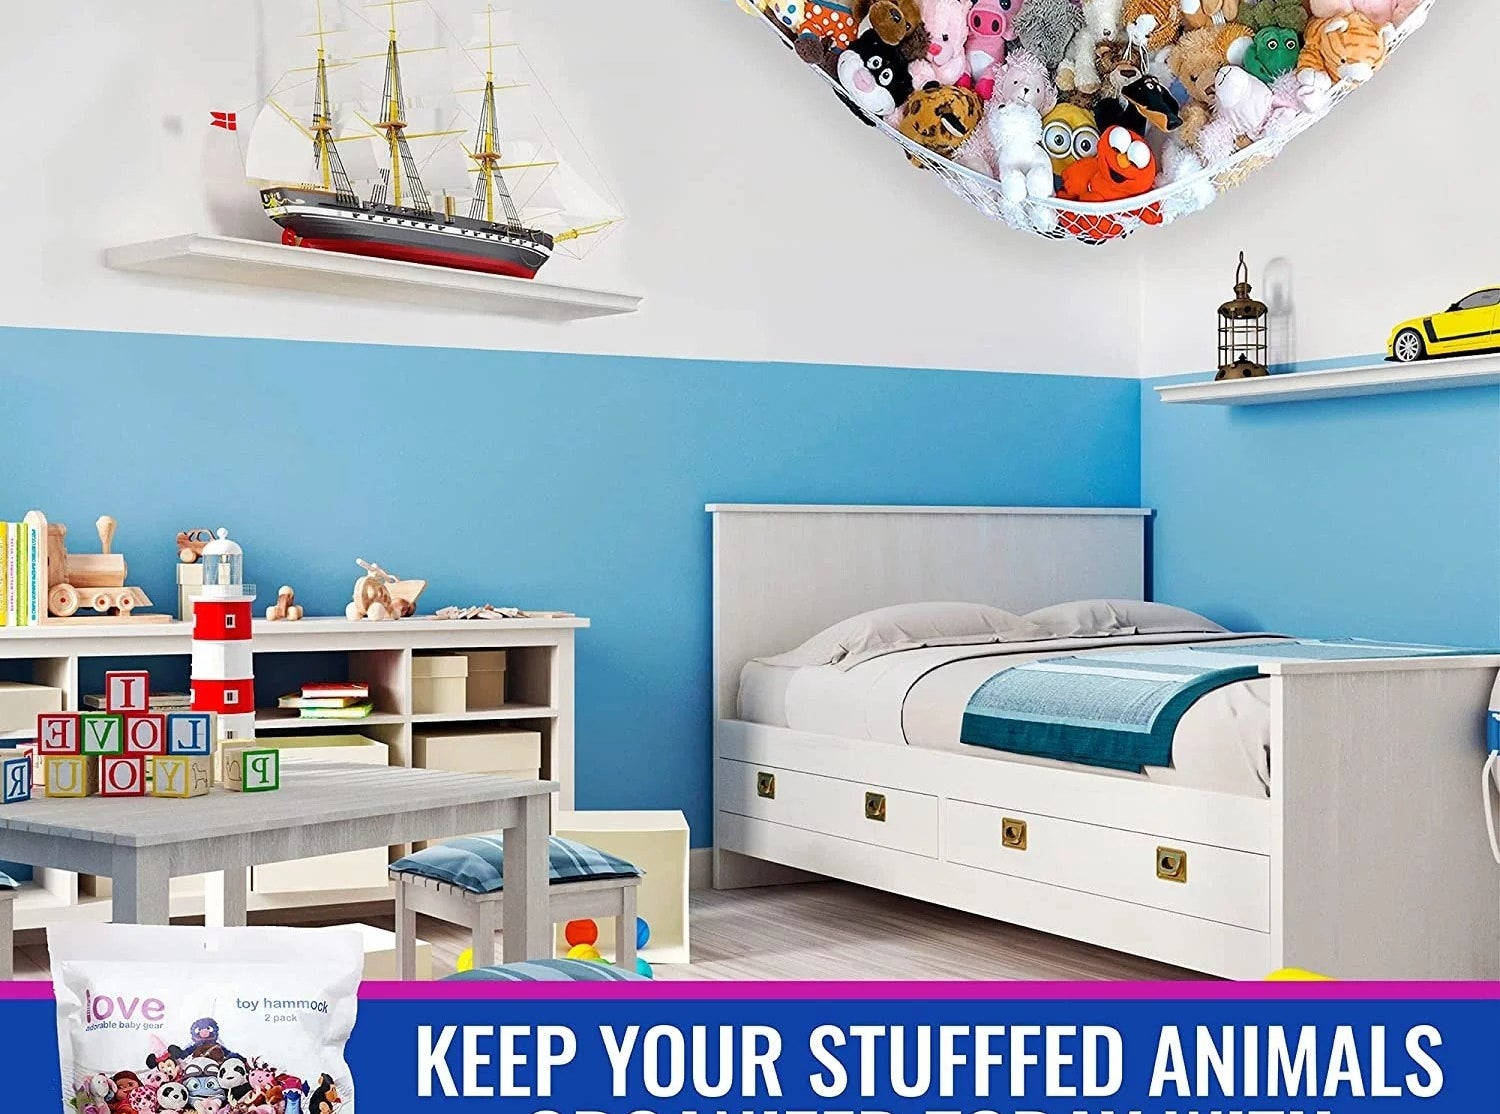 Stuffed animals are stored in a hammock in a room